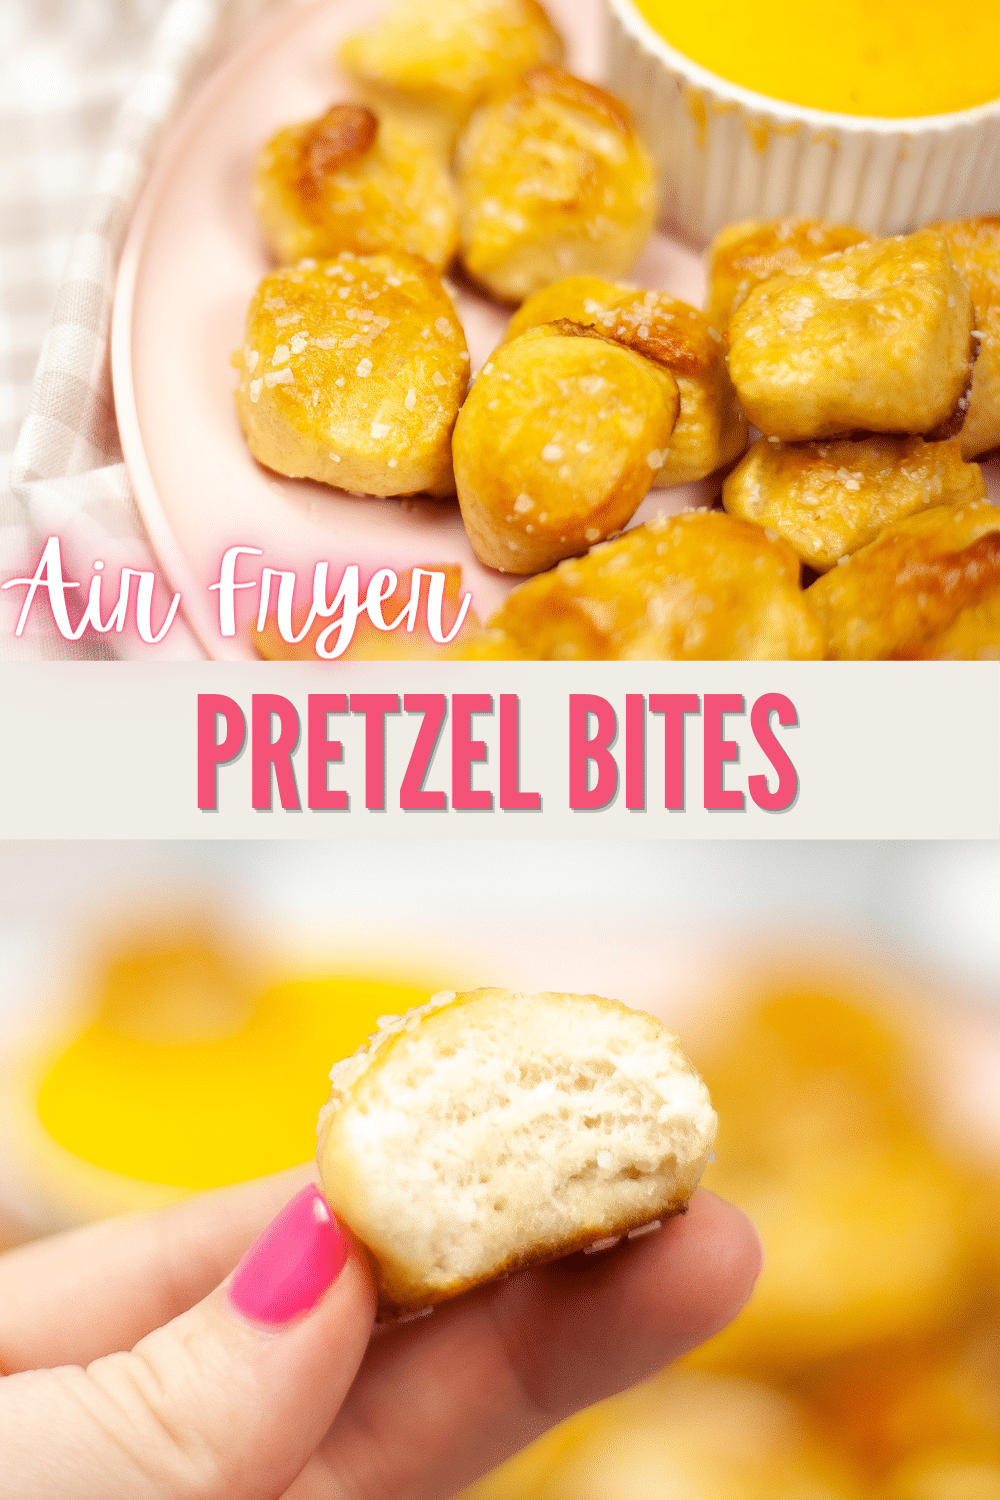 These Air Fryer Pretzel Bites are the perfect snack or appetizer! Serve them with your favorite dipping sauce or enjoy them plain. #airfryer #pretzelbites #airfryerpretzelbites #airfryerpretzels #pretzels via @wondermomwannab